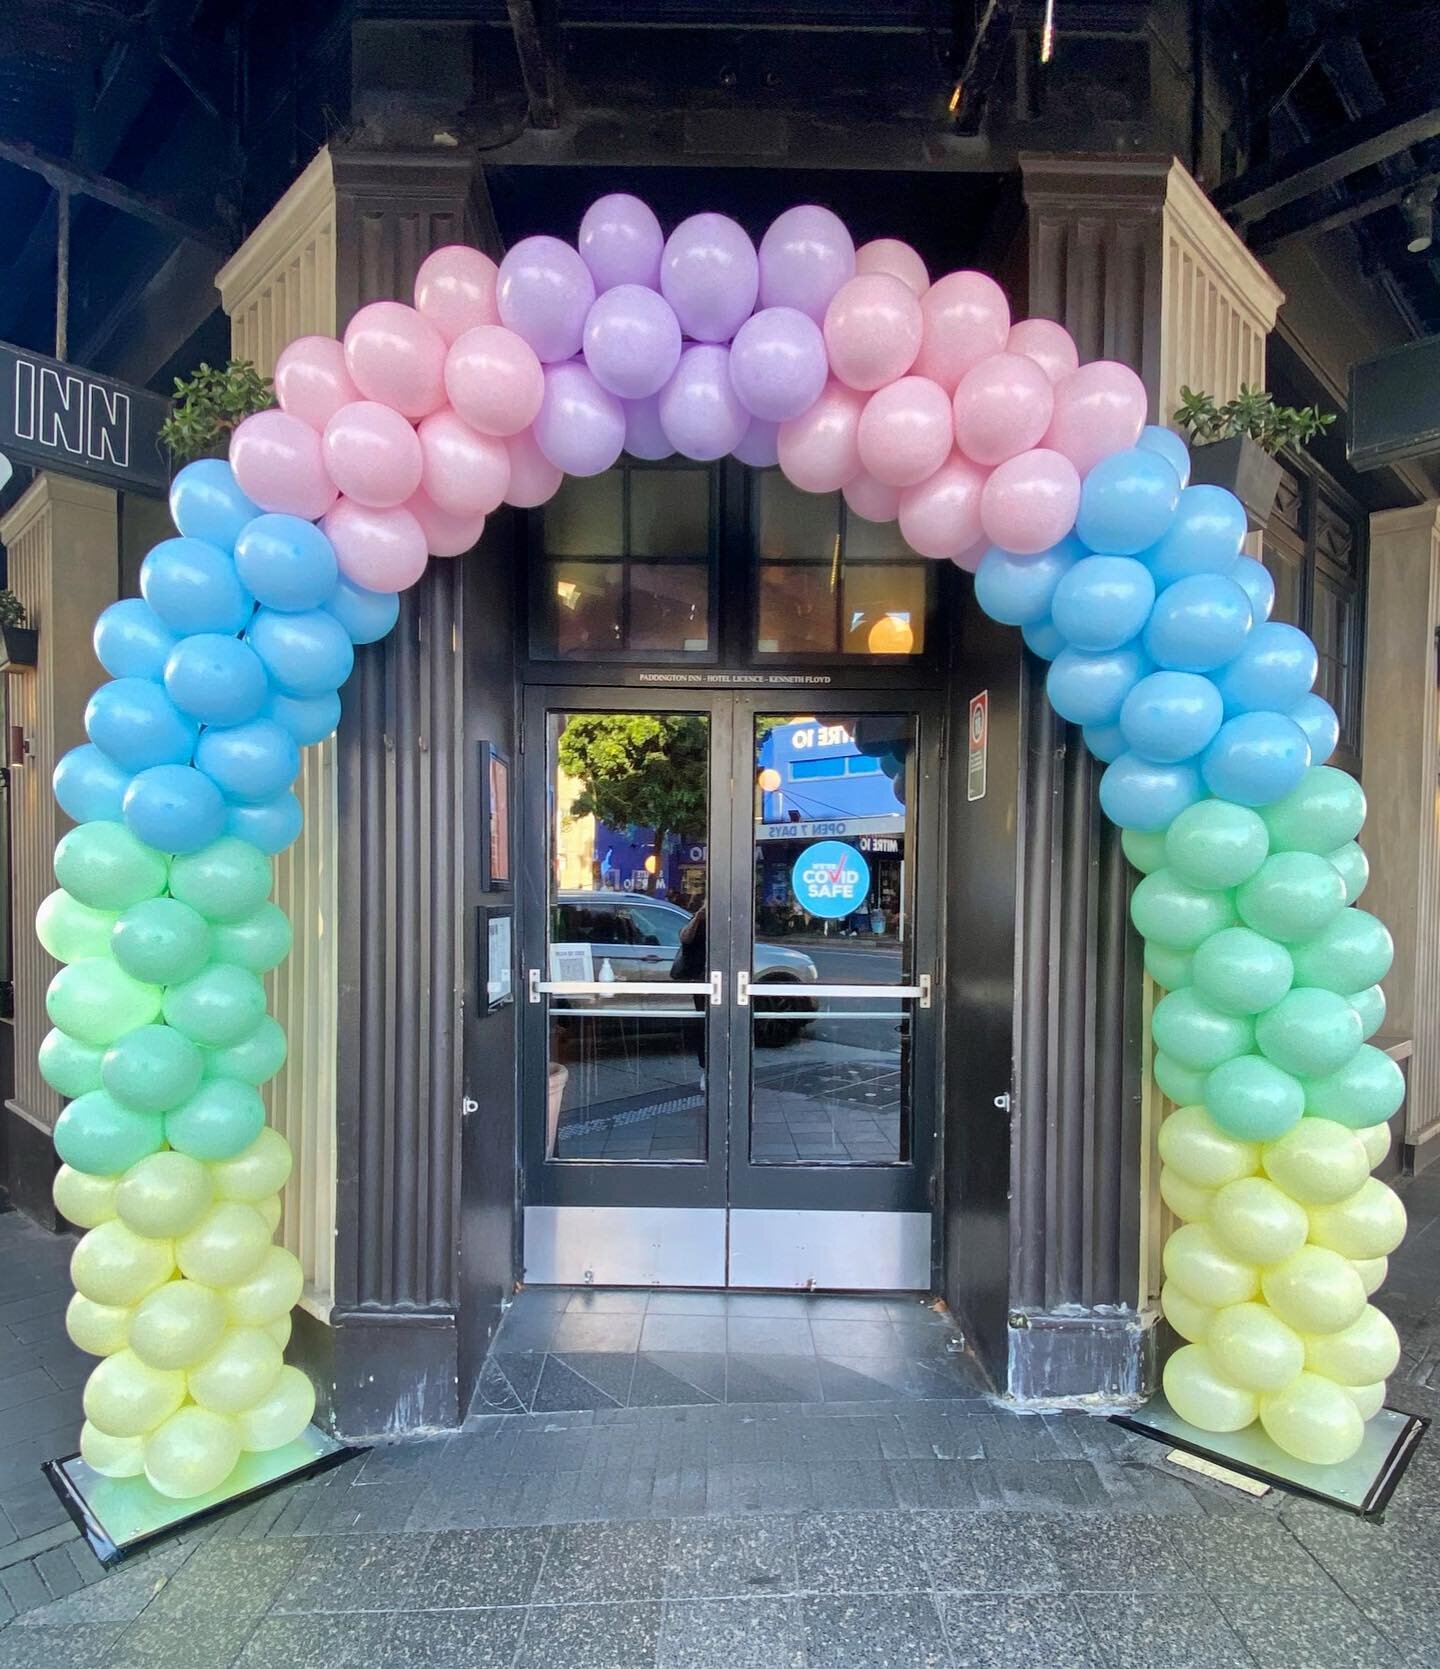 🏳️&zwj;🌈 HAPPY #MARDIGRAS 🏳️&zwj;🌈 Love from the @paddoinn ✨💗 Although the location may have changed this year we are so thrilled to see #pride still filling the streets of #Sydney! 🌈 #mardigras2021 #houseofballoons_au #mardigrassydney #pridemo